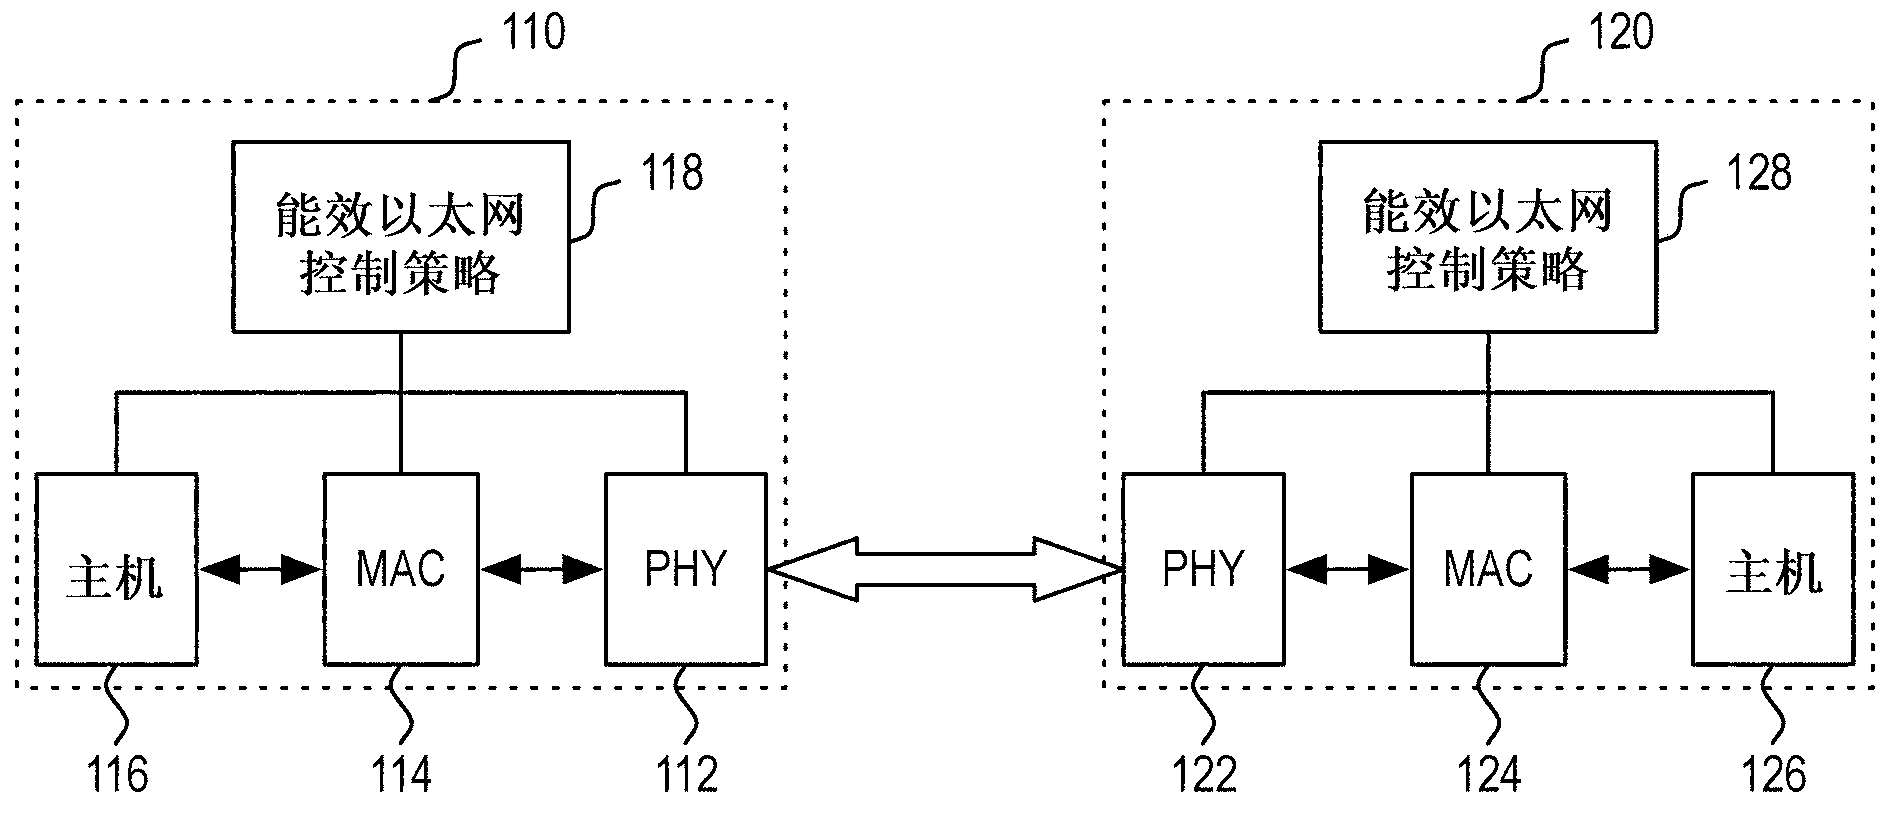 Energy efficient Ethernet with asymmetric low power idle